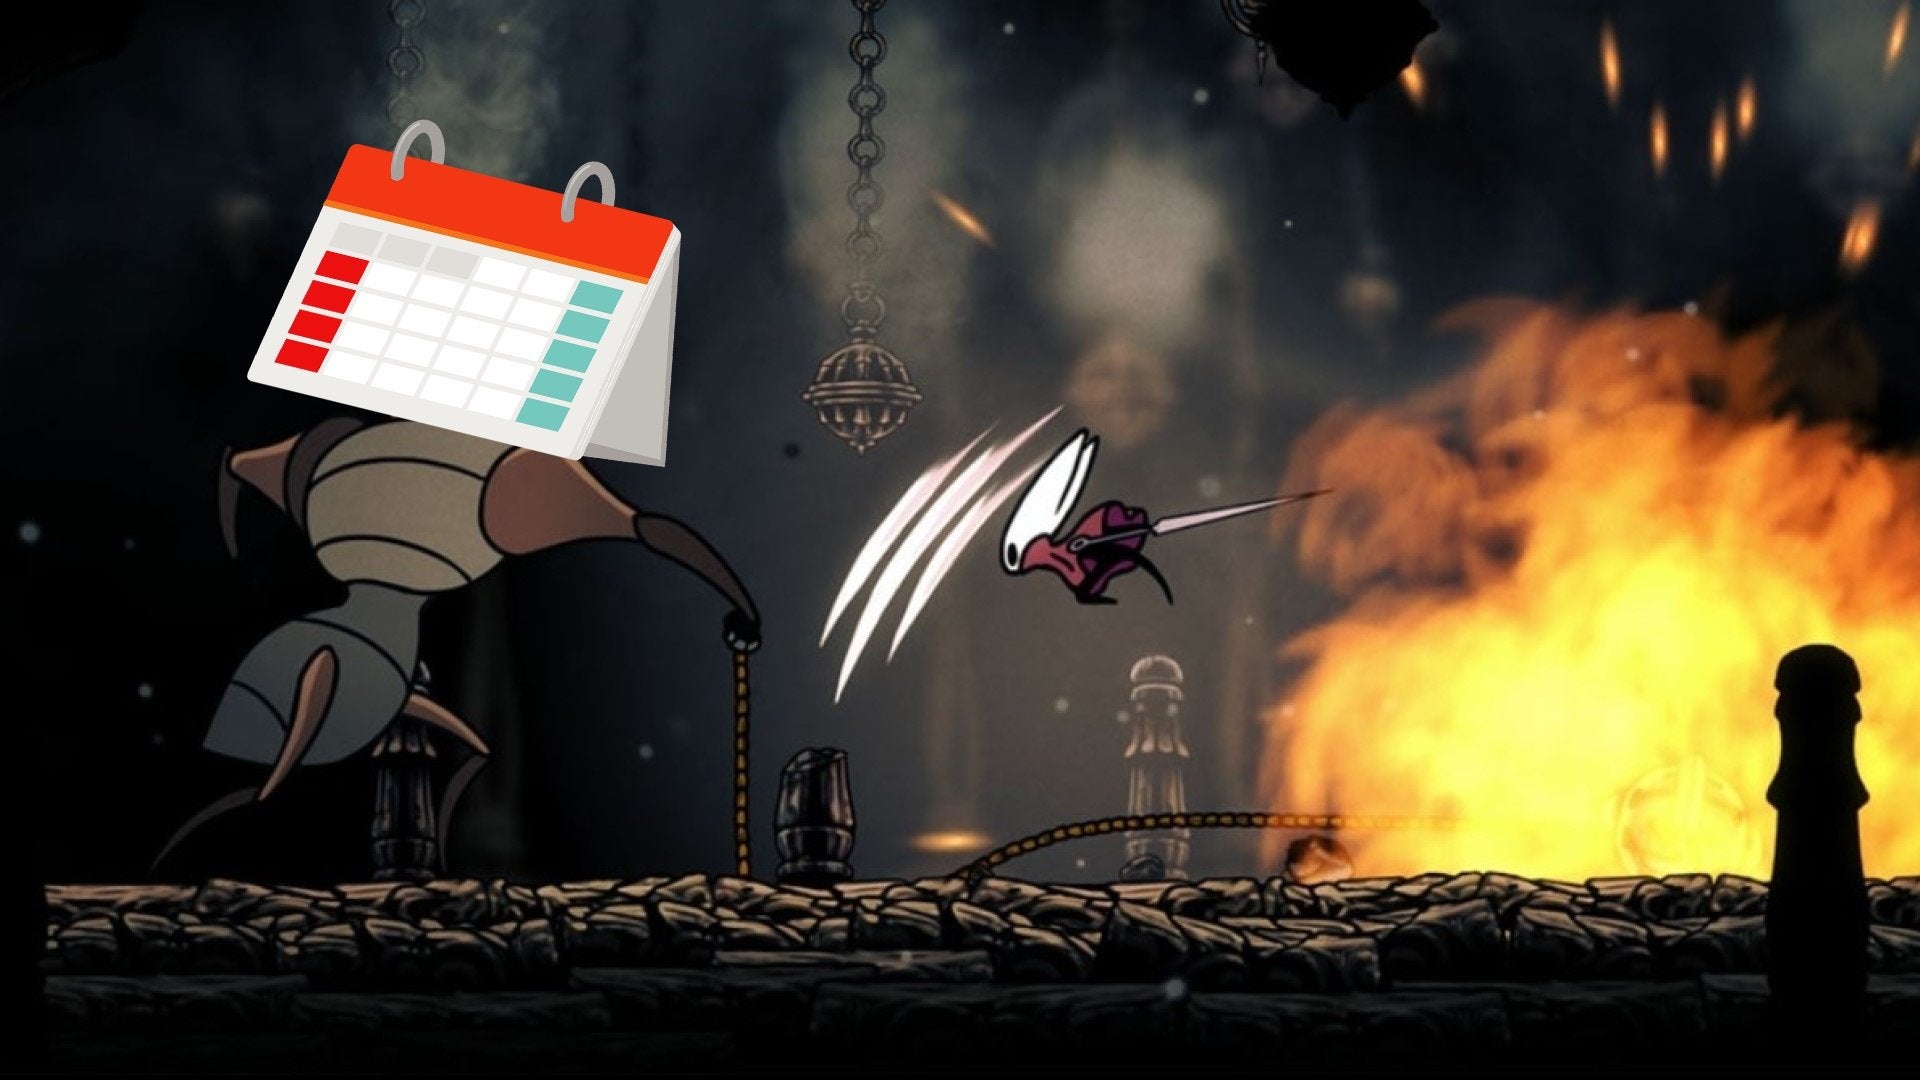 Hornet from Hollow Knight: Silksong attacking an enemy that has a calendar for a head.